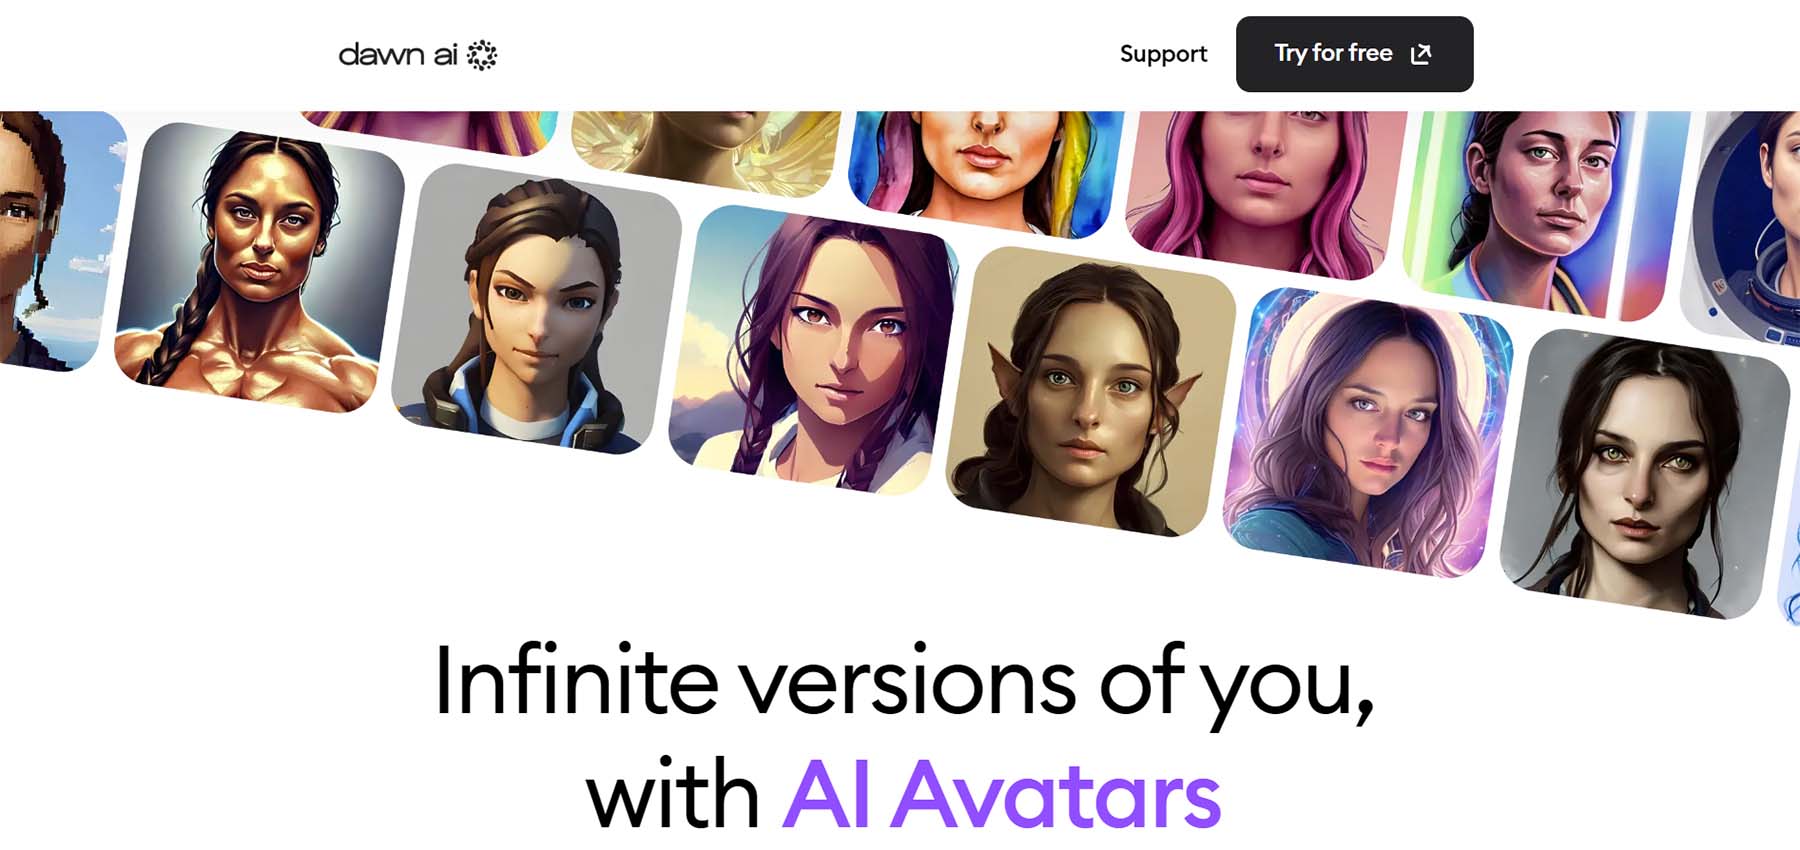 Unlimited Avatar Creator Kit by Dighital